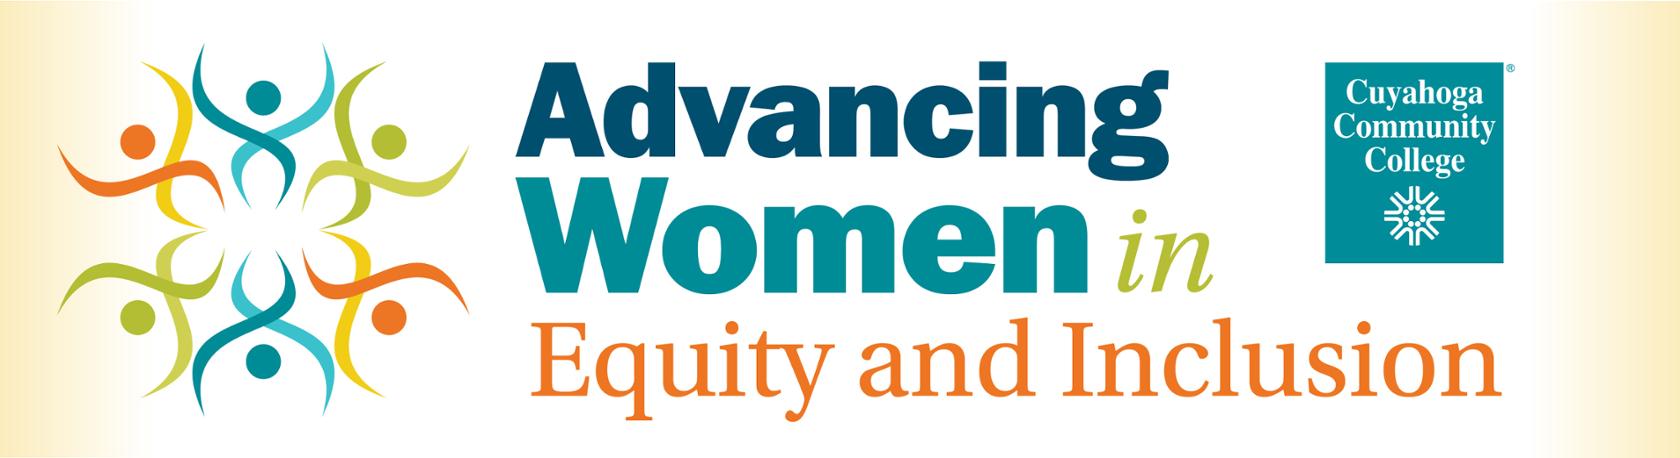 Advancing Women in Equity and Inclusion